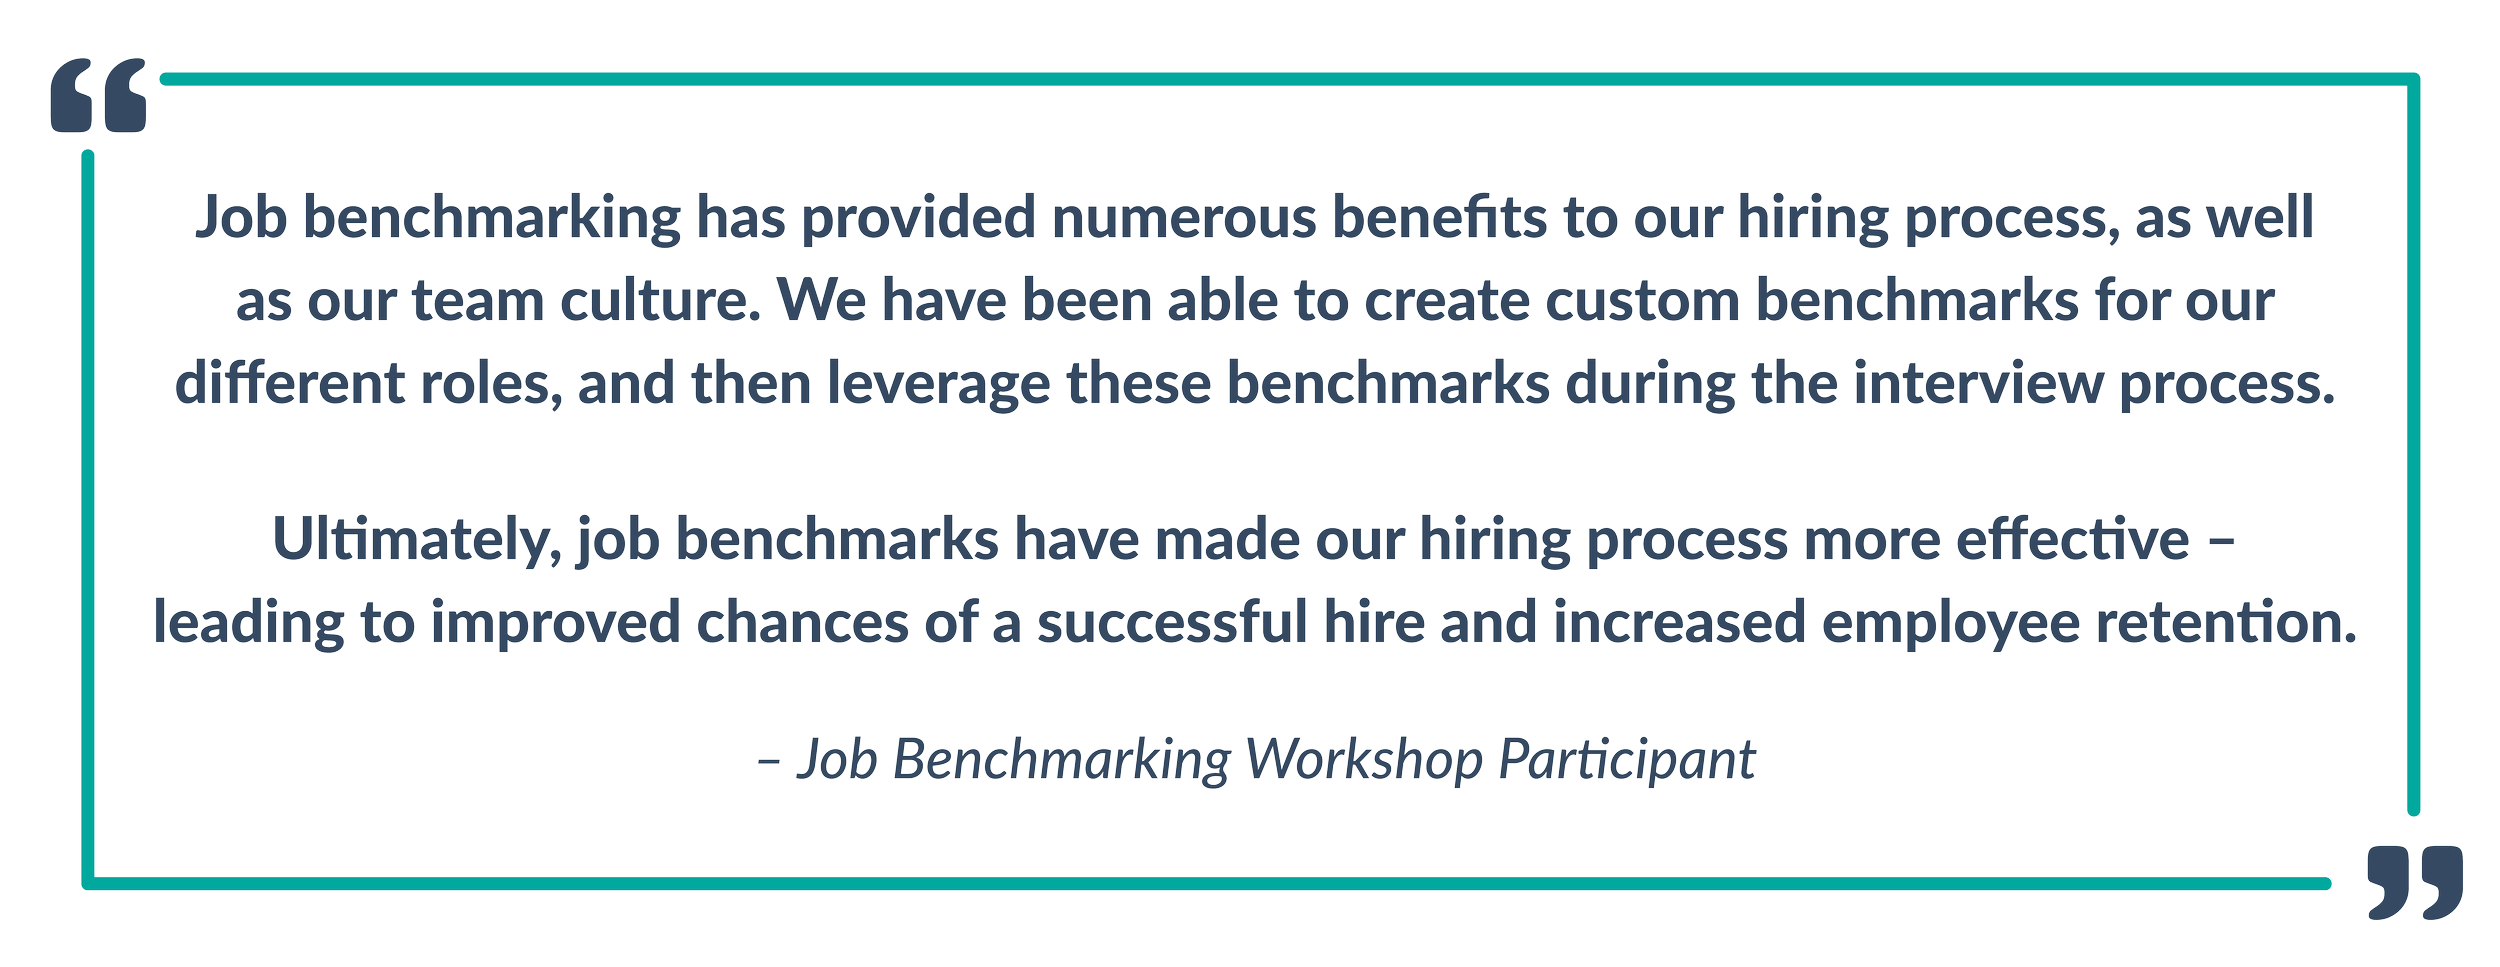 Job benchmarking has provided numerous benefits to our hiring process as well as our team culture.